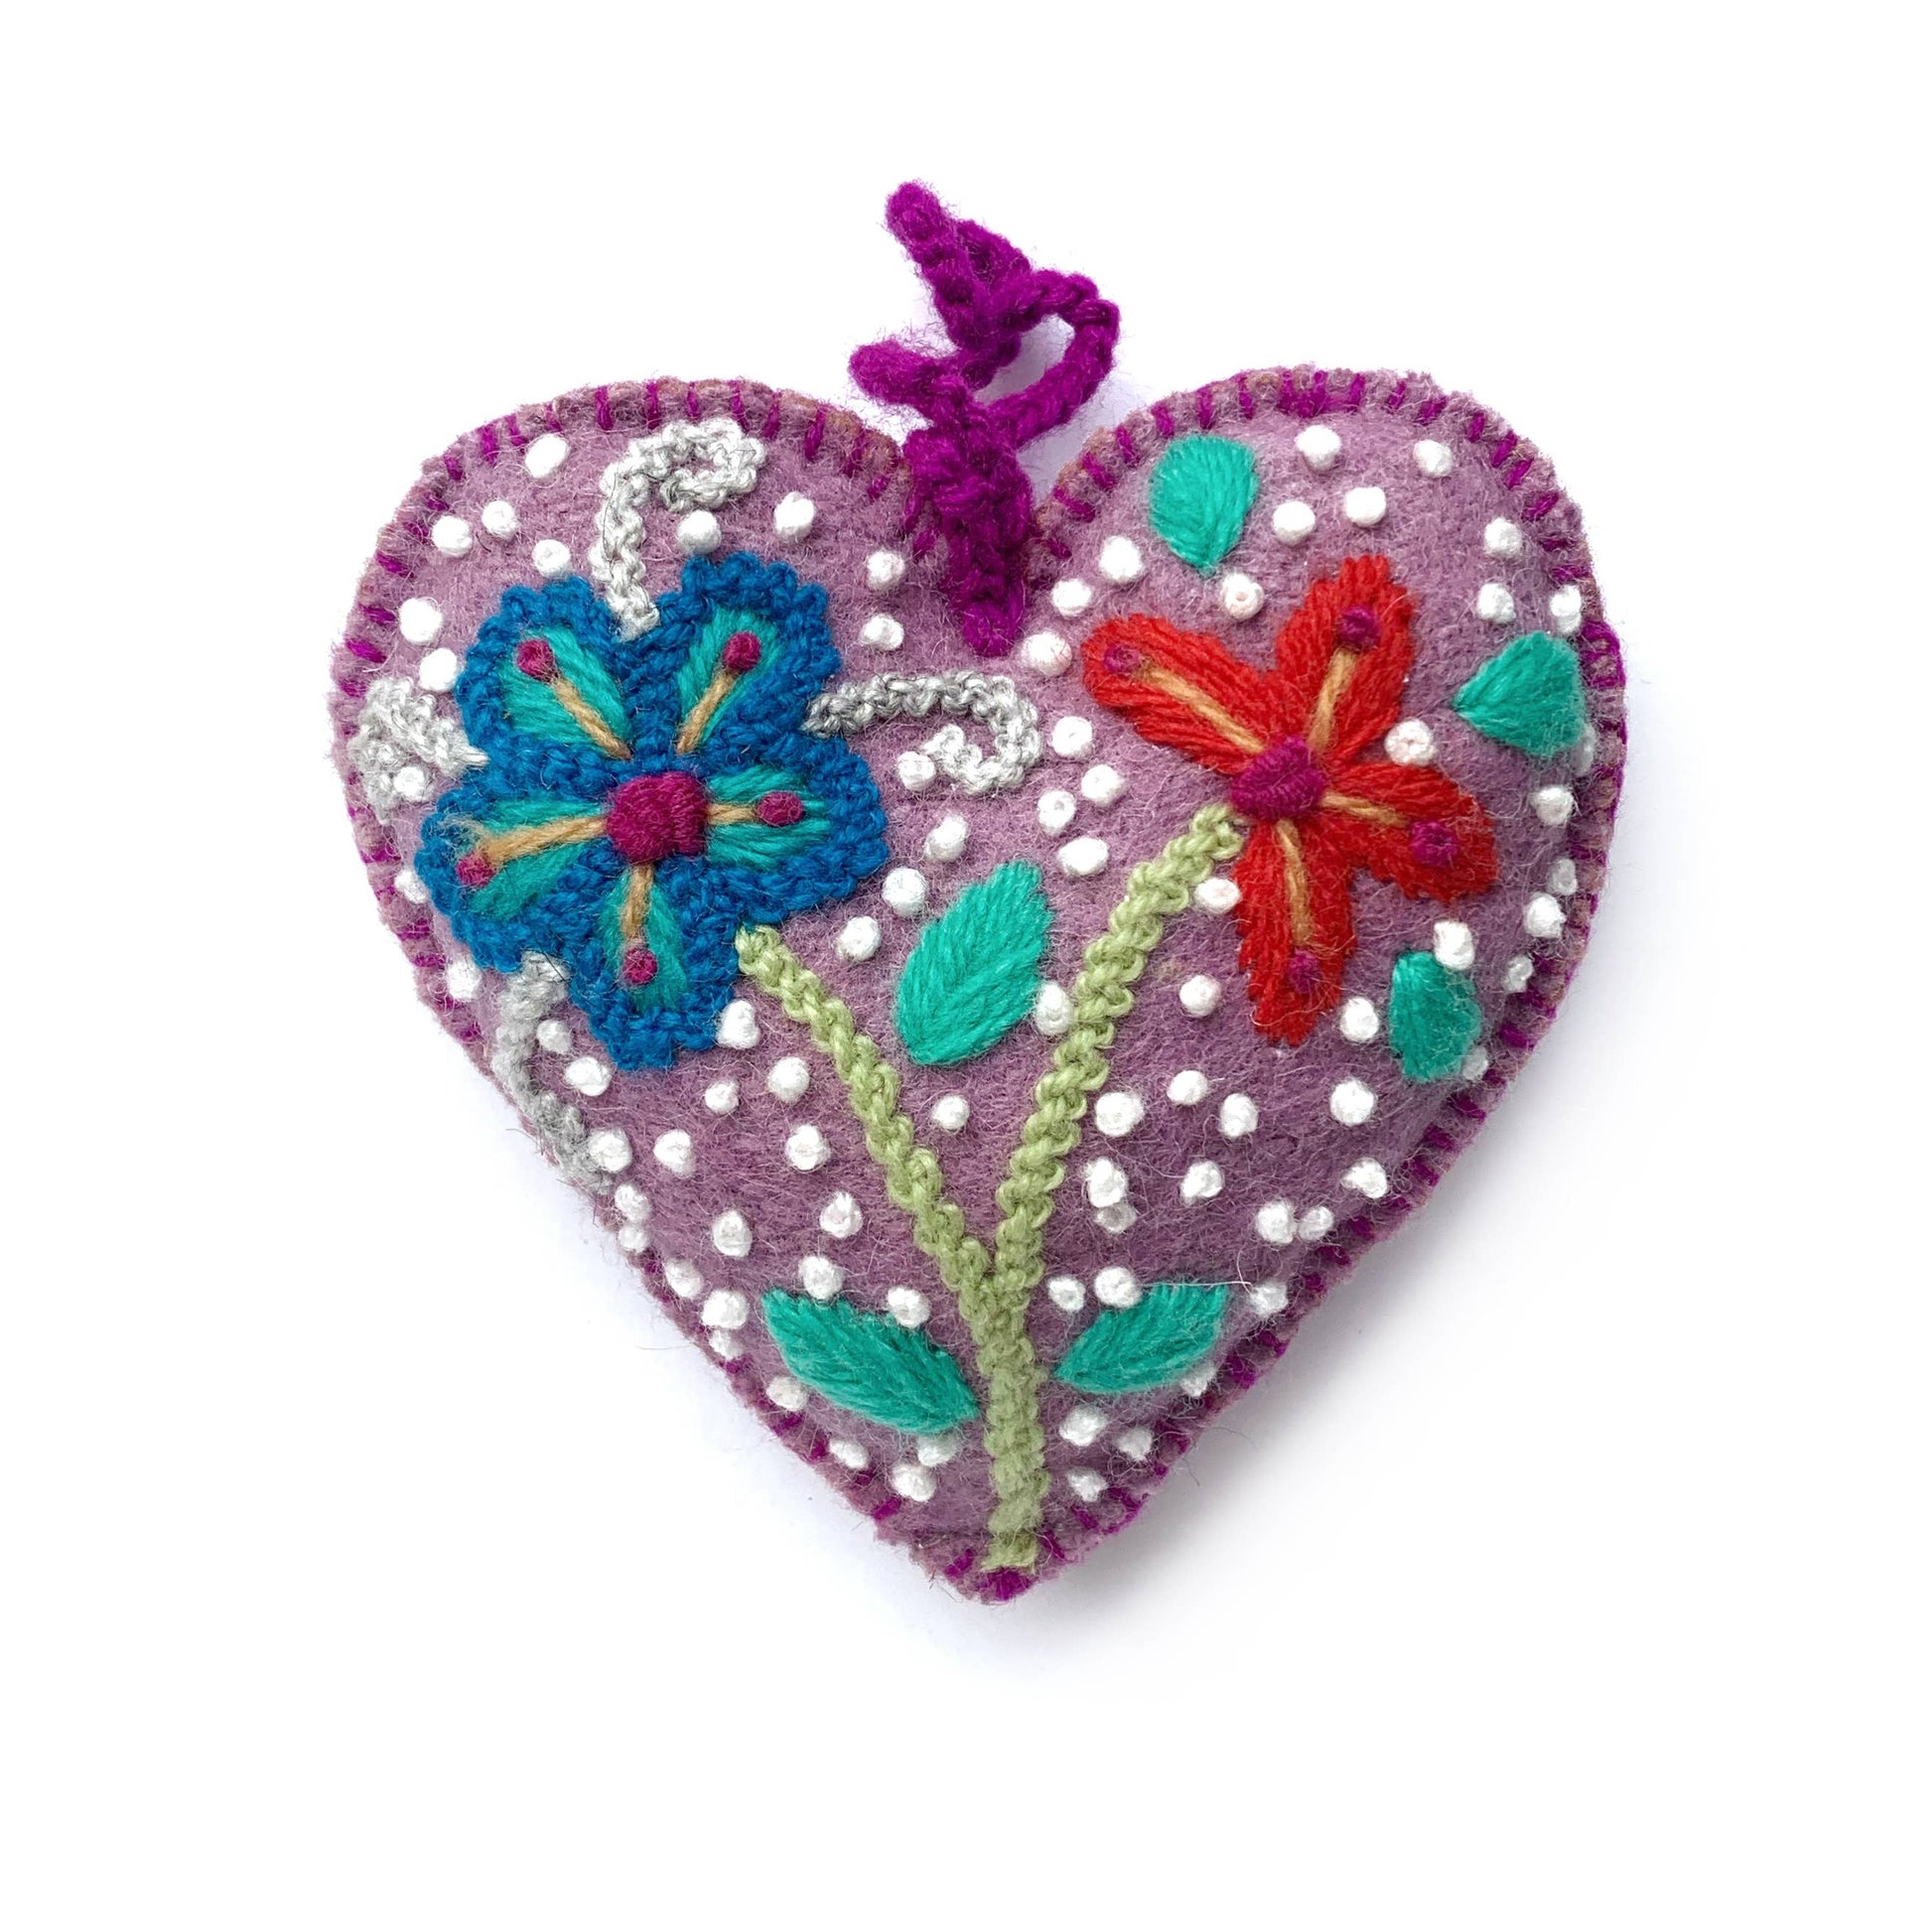 Set of 6 Handmade Ceramic Heart Ornaments in Colorful Tones, 'Flora and  Fauna Heart